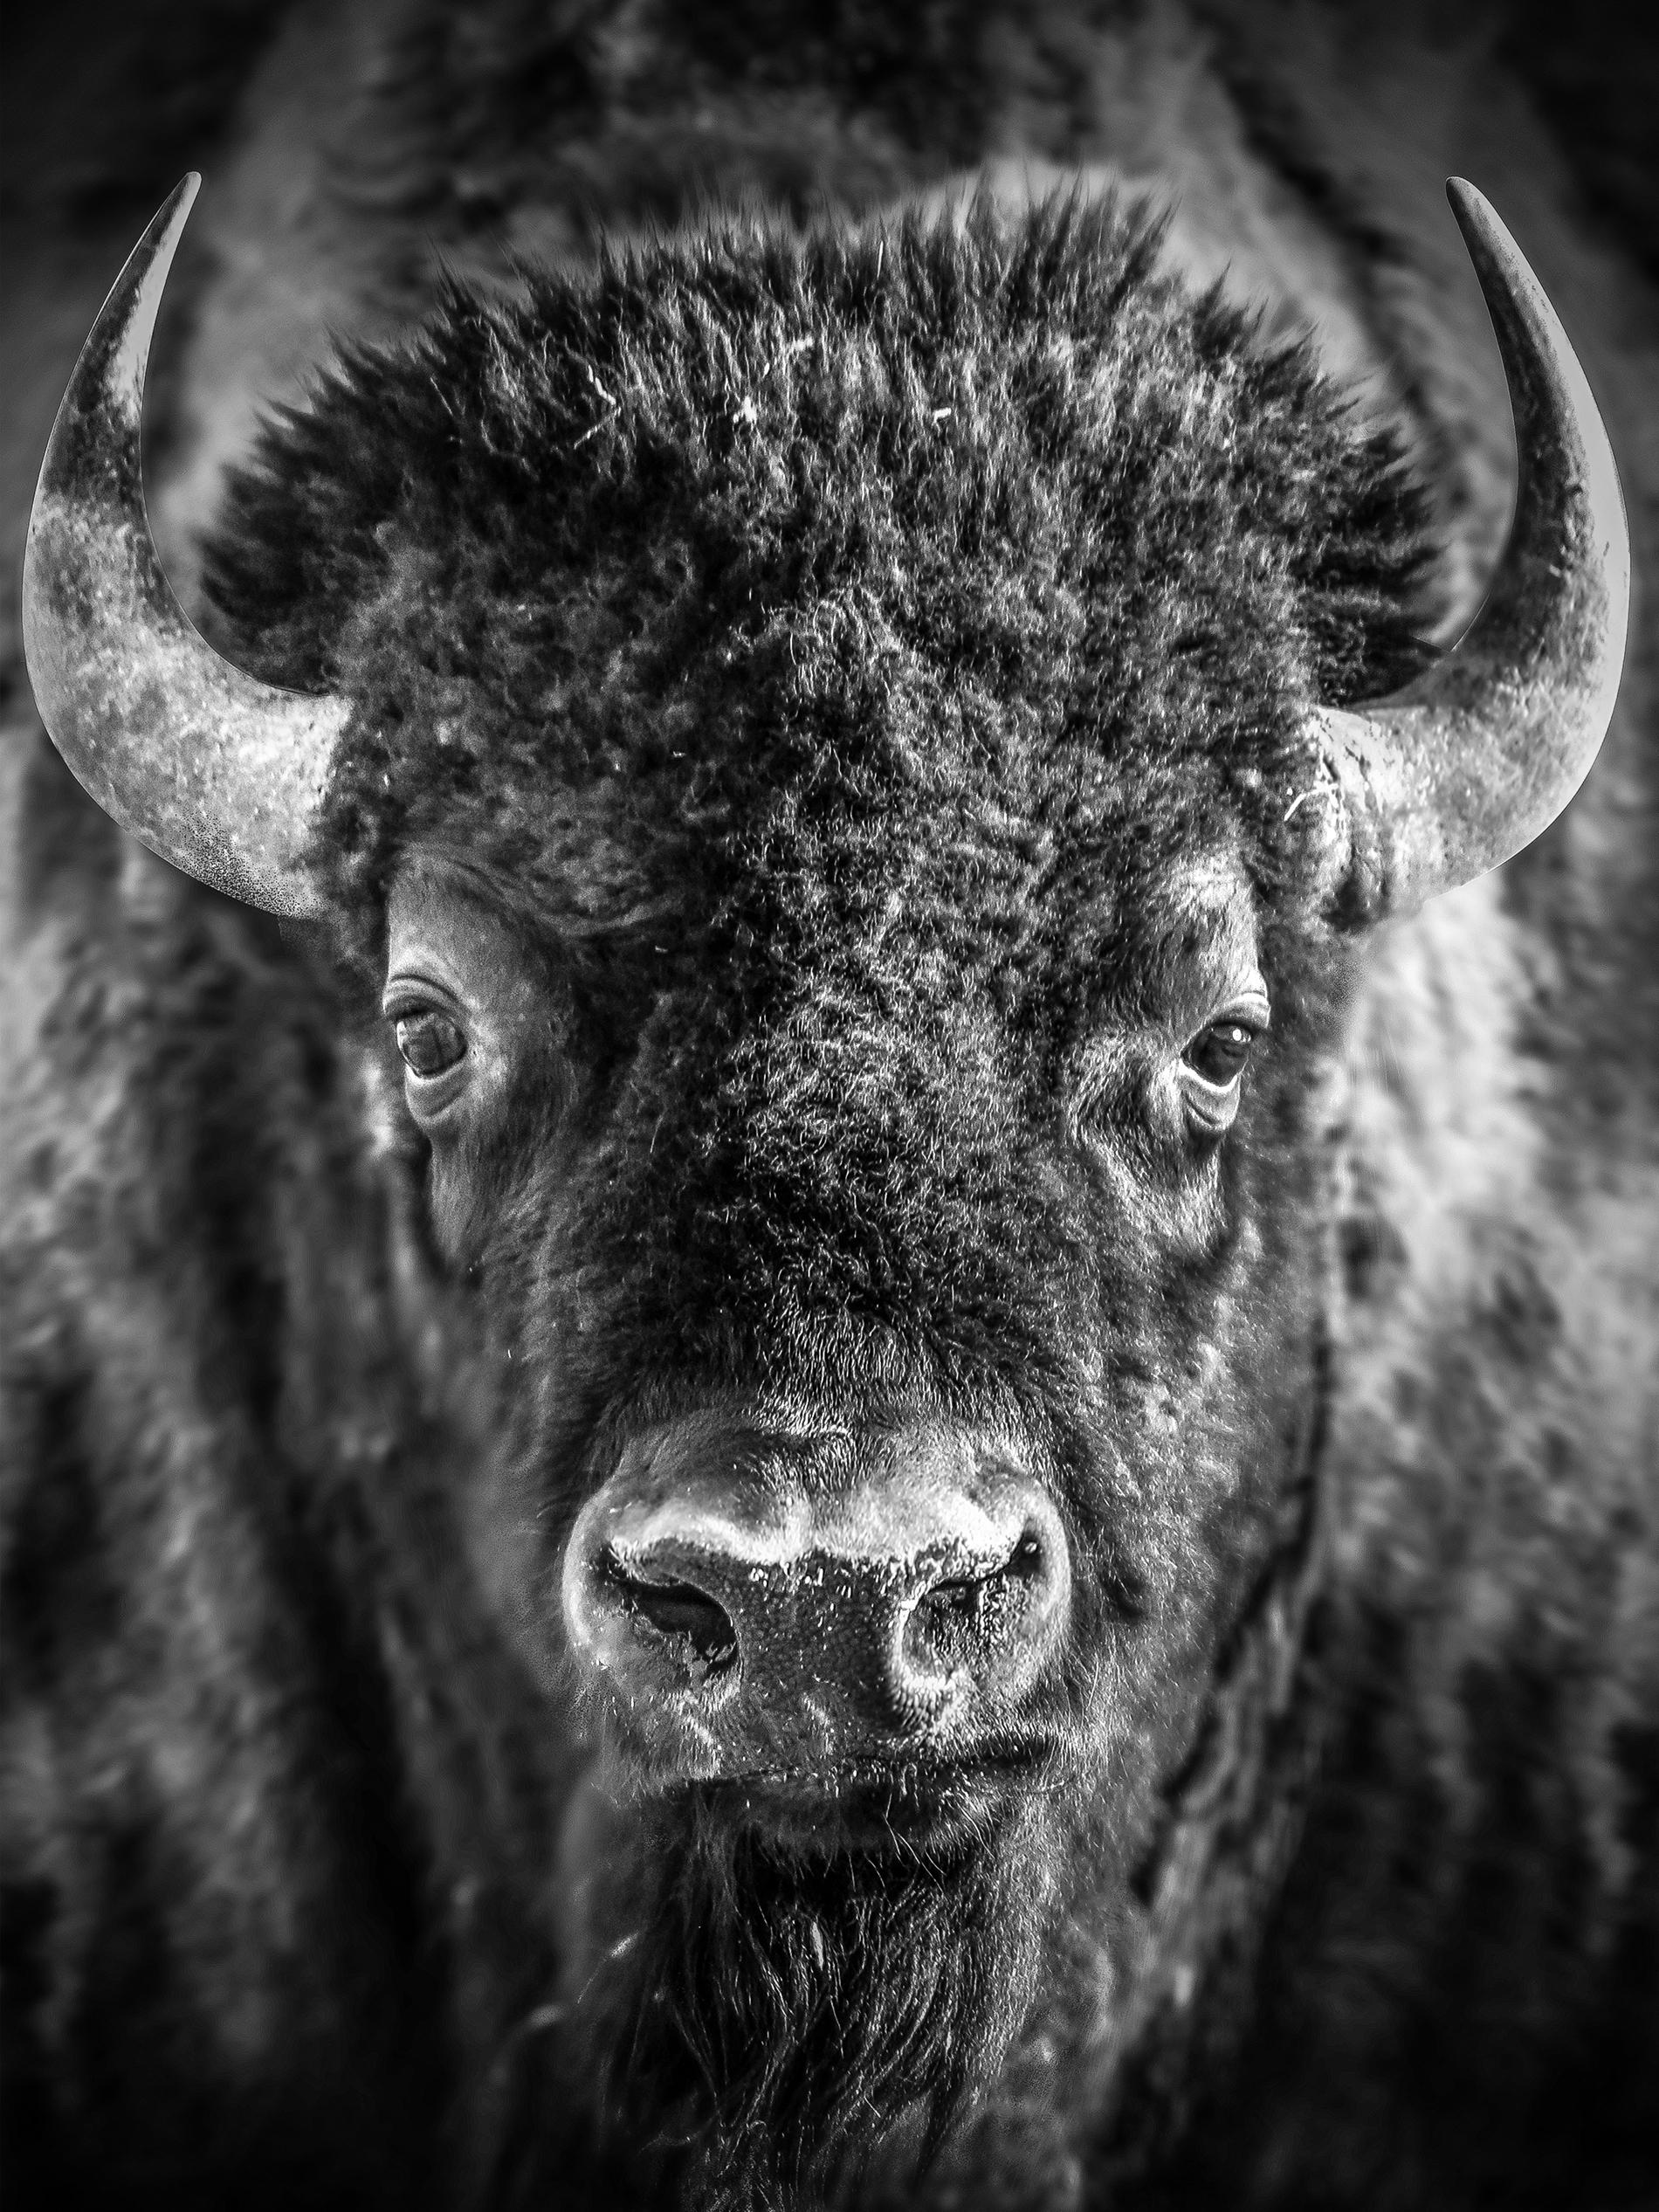 Shane Russeck Black and White Photograph - "Bison Portrait" 36x48 Black & White Photography Bison Buffalo Western Art Print